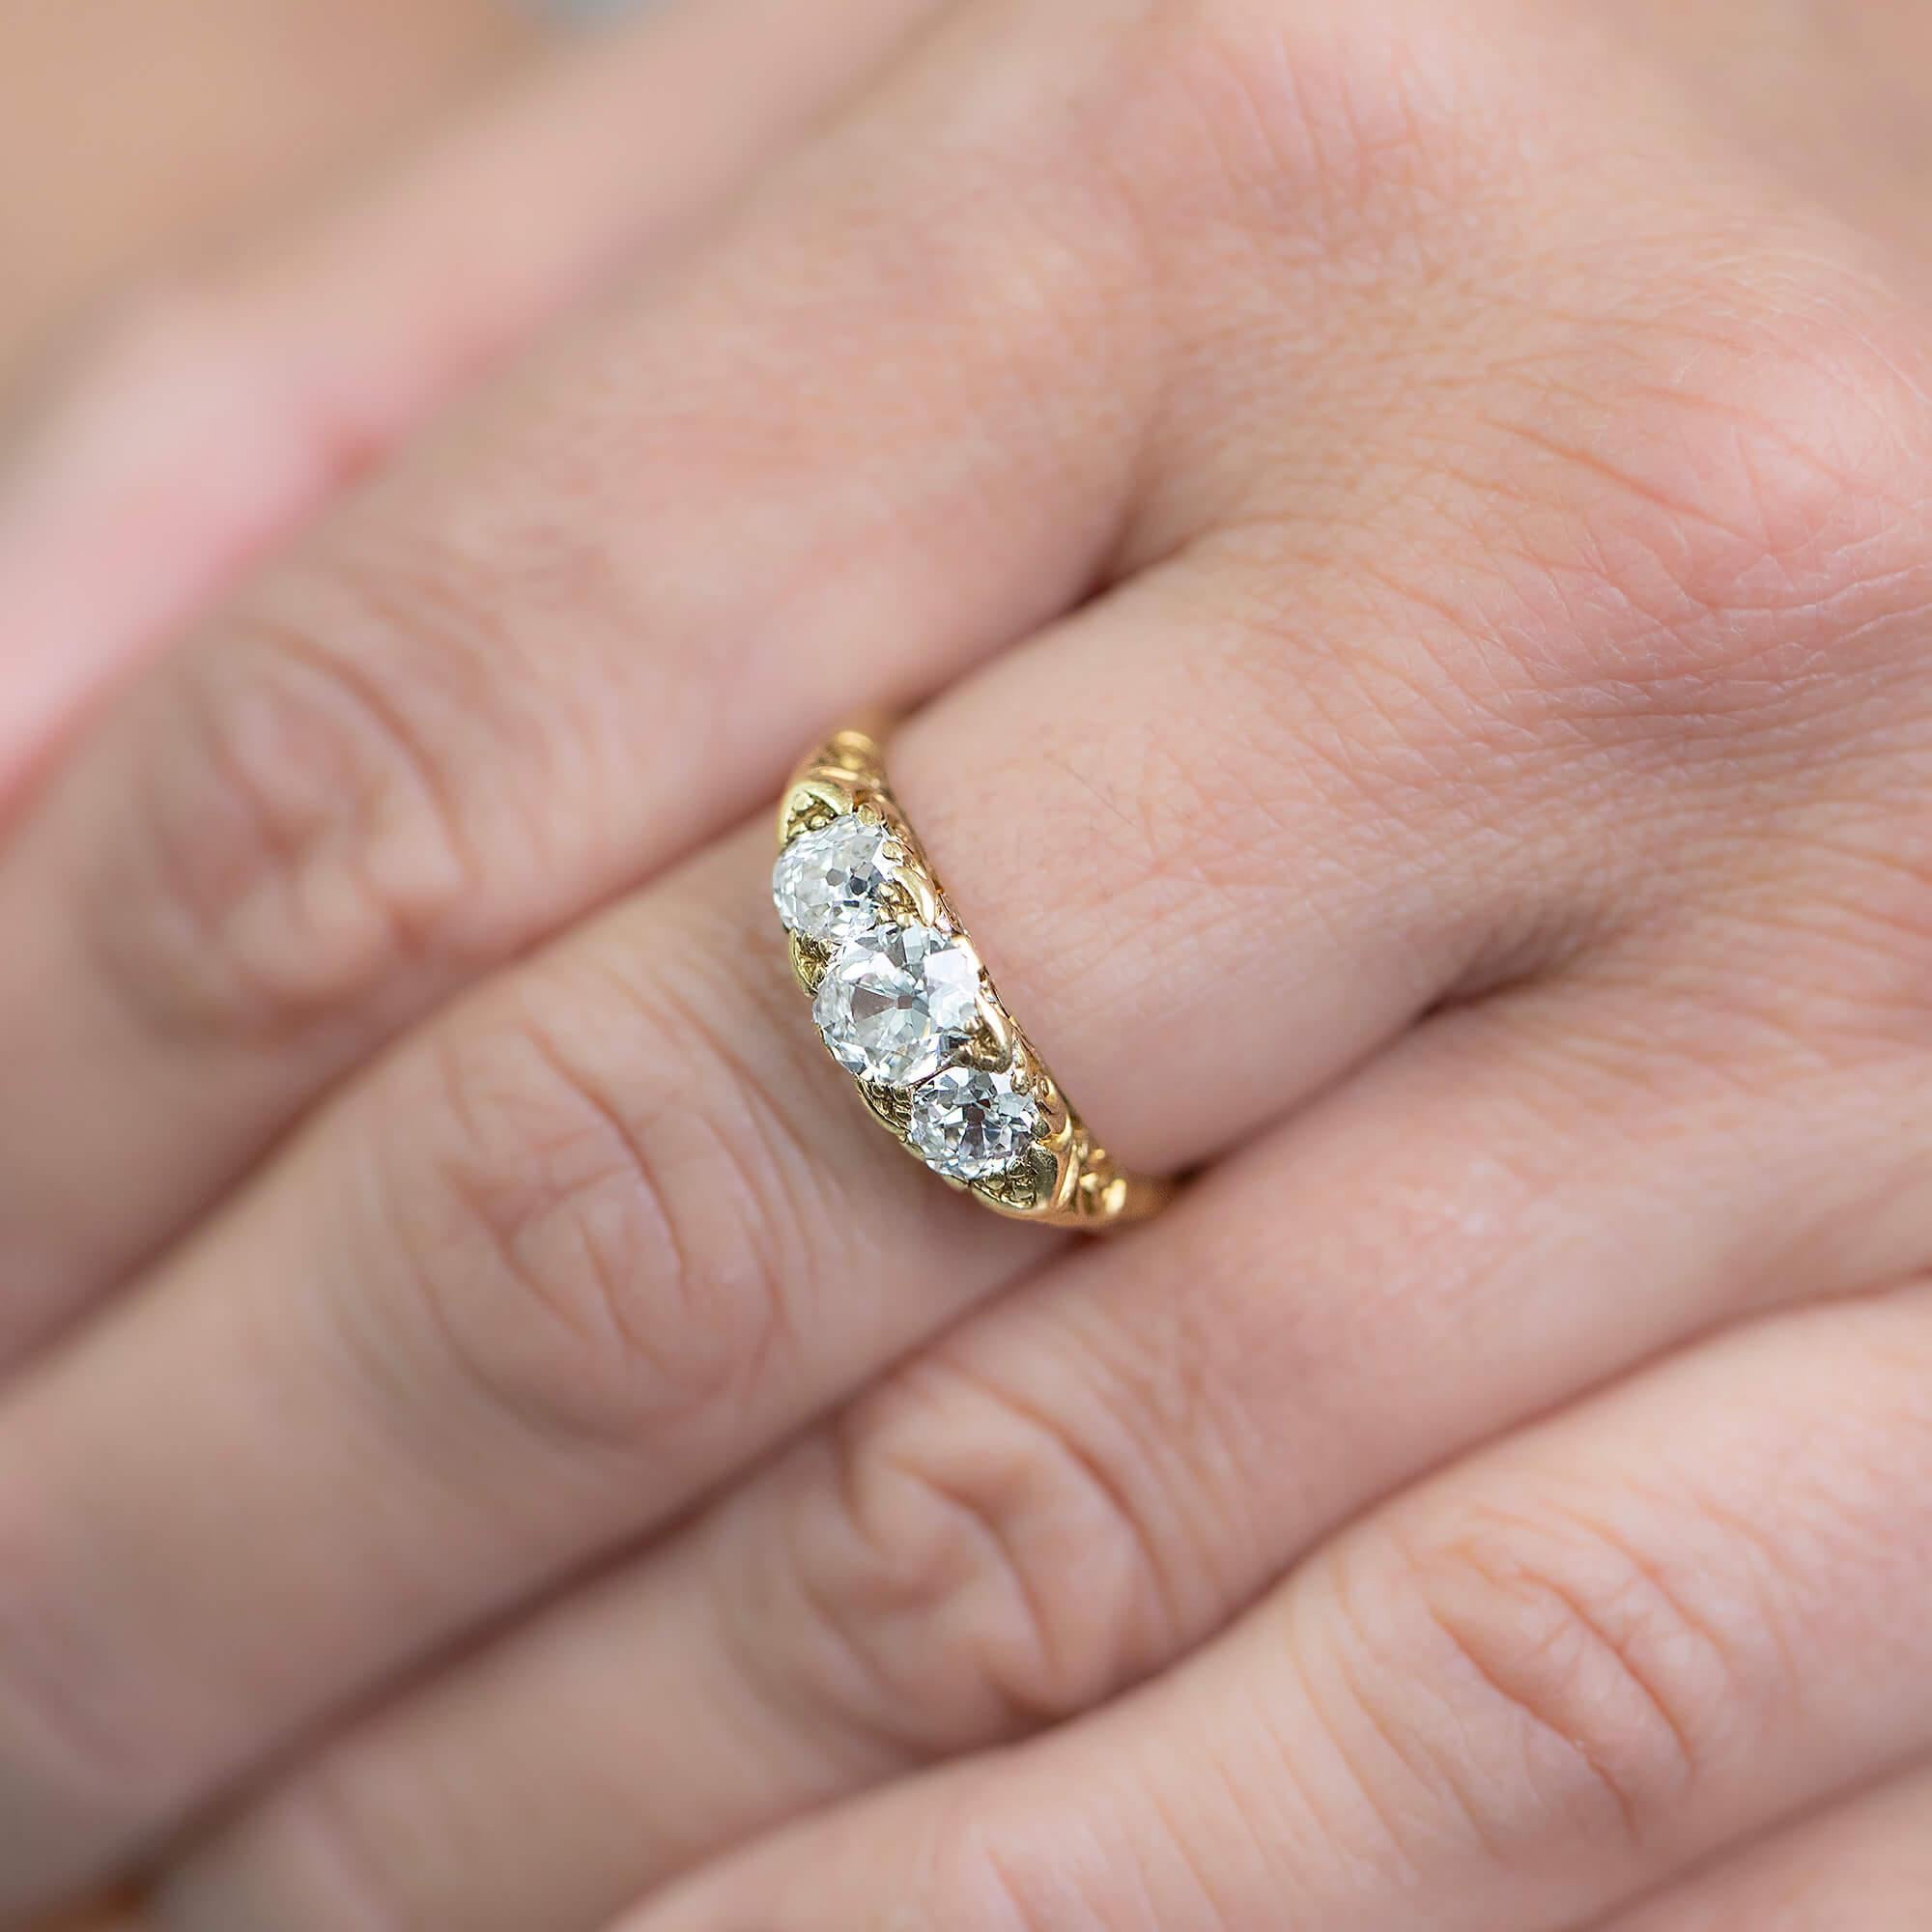 This is a beautiful Victorian, scrolled half hoop design, set with three old mine cut diamonds, hand-crafted in 18k yellow gold.
The half hoop is a lovely style of ring, sitting across the top of the finger, making the most of this space by filling